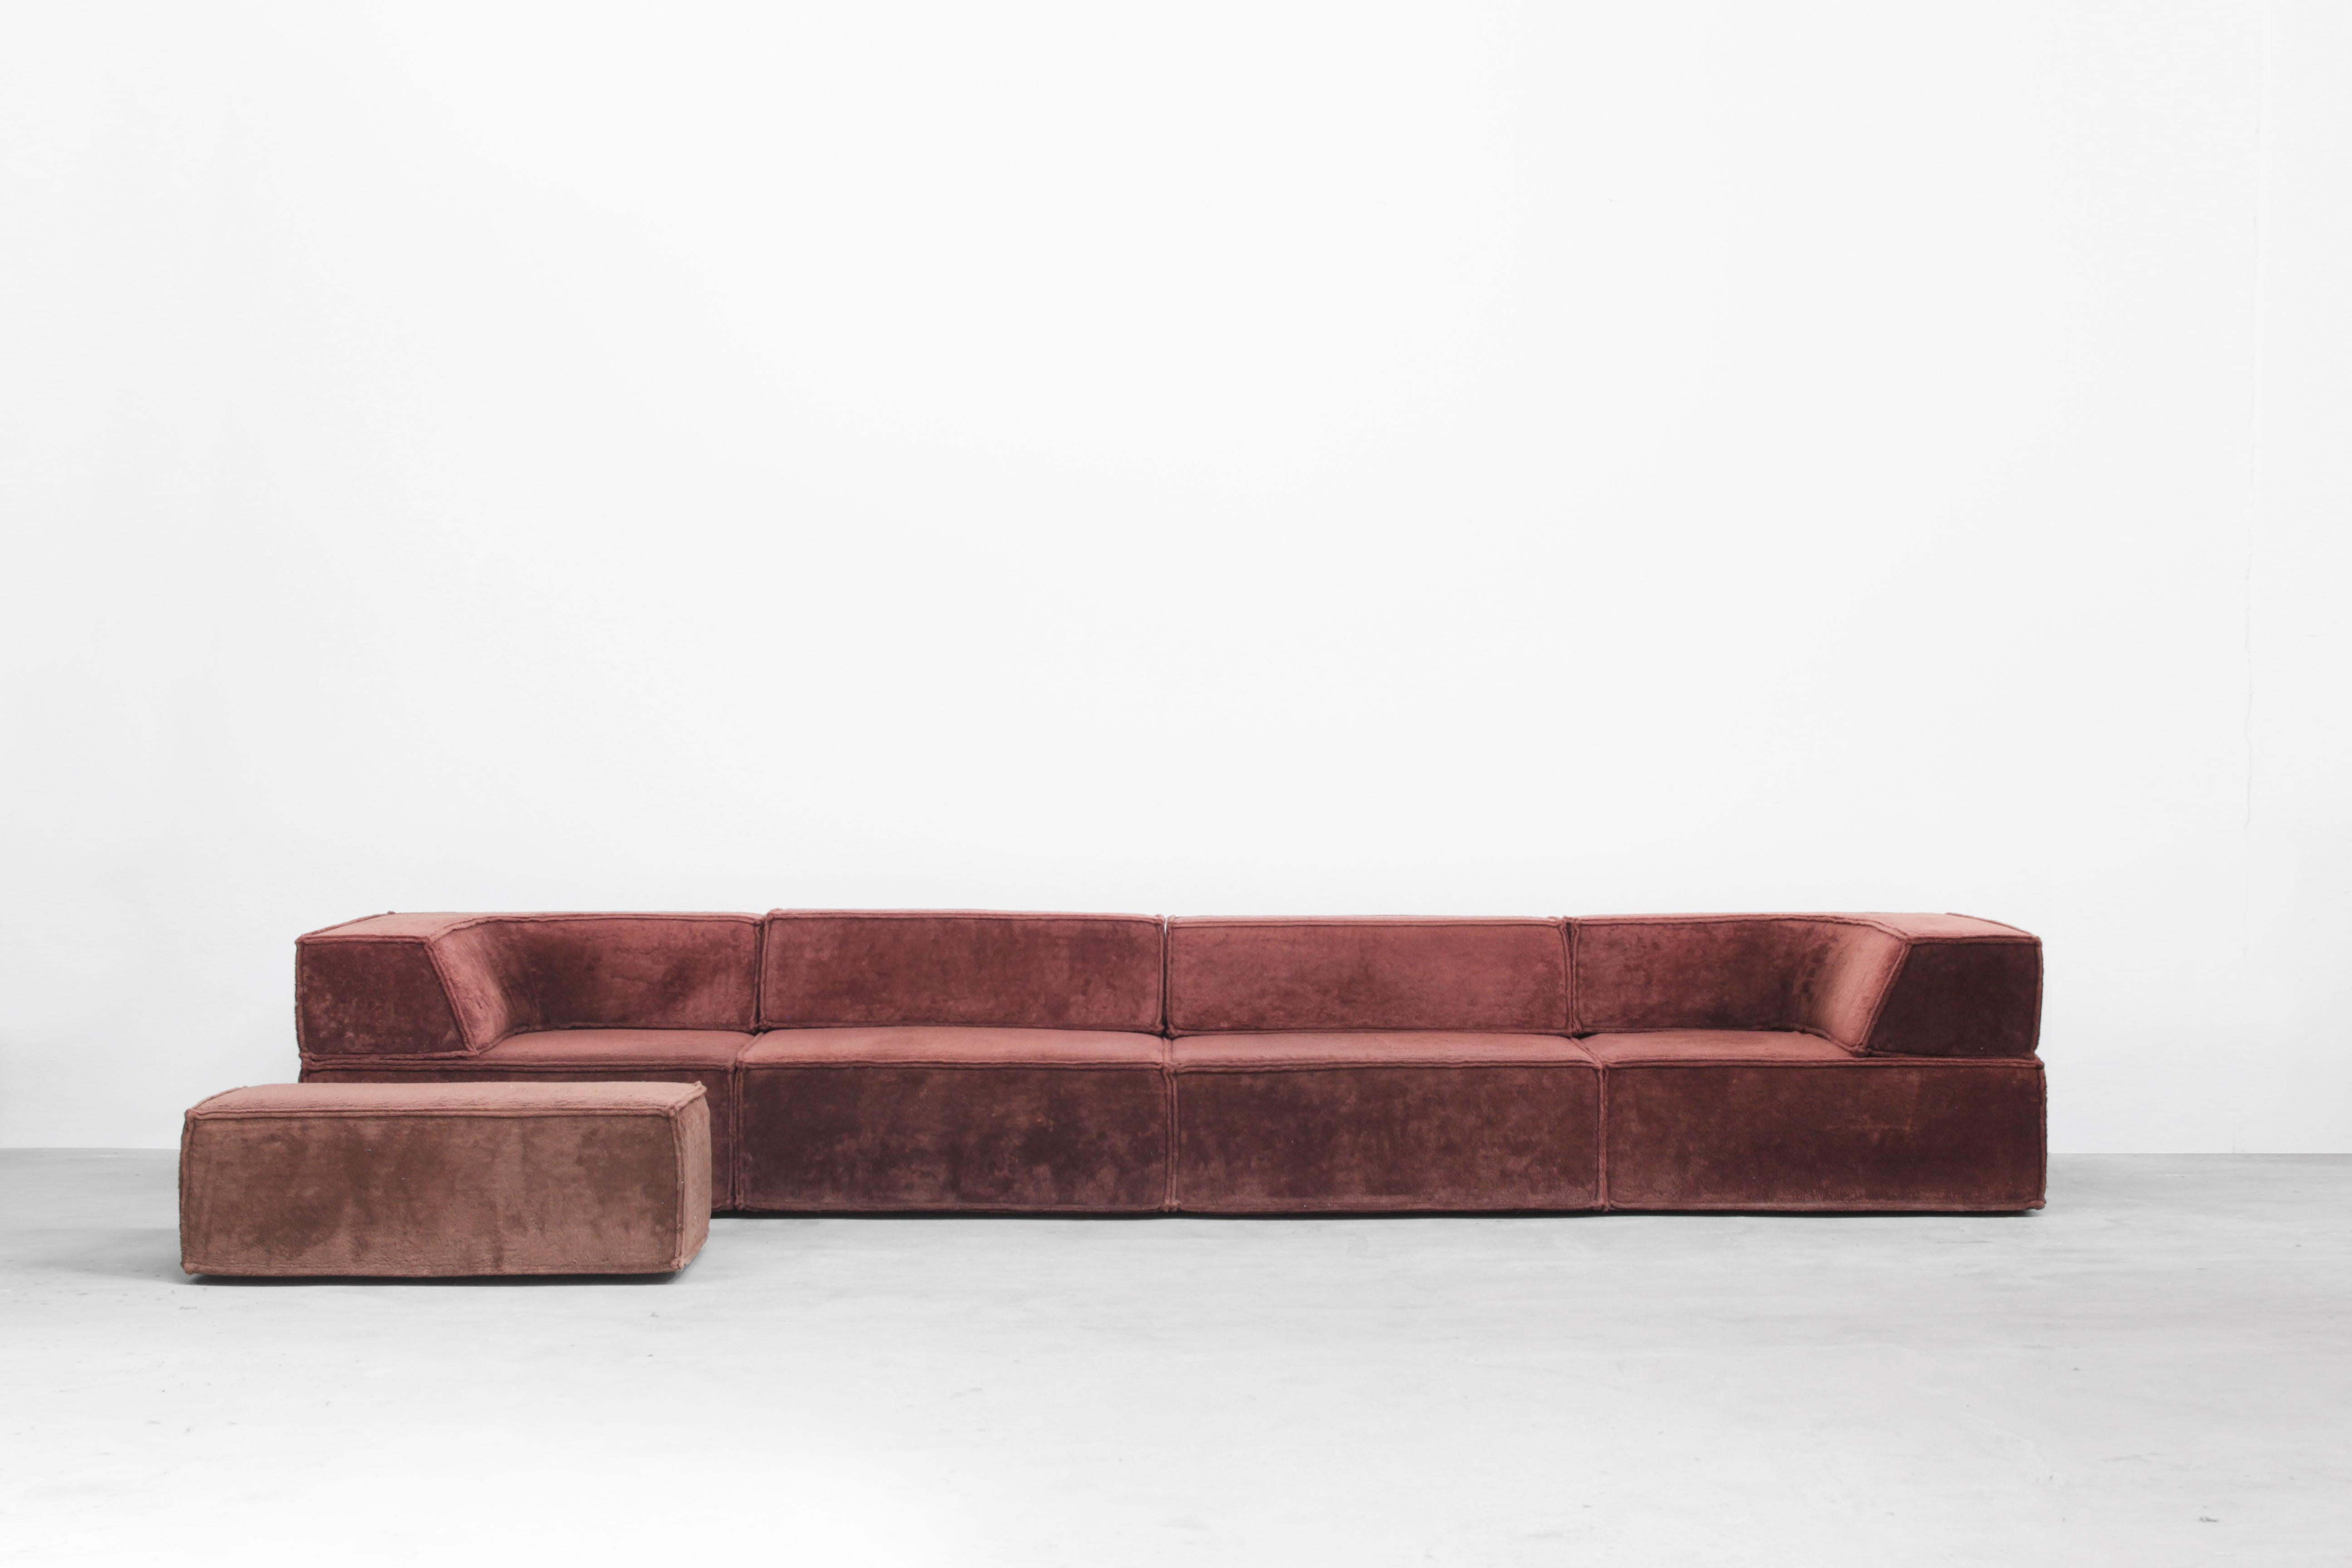 Very beautiful sofa landscape designed by the Swiss Designers Group named Form AG and produced in the 1970s by COR, Germany. Many different kinds of variants are possible because of the modular and adjustable system of the sofa.
The sofa comes in